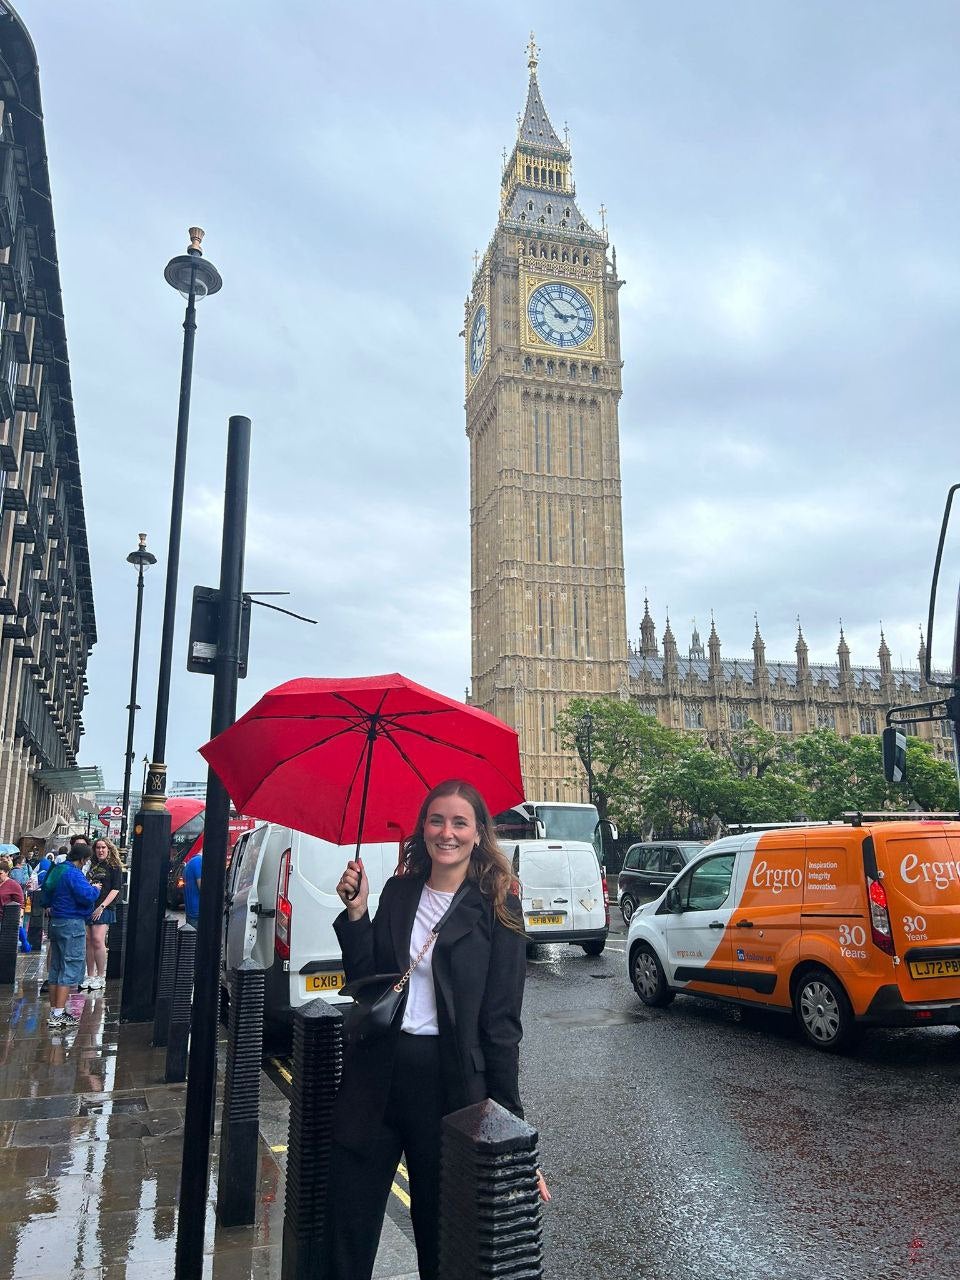 Iryna took part in the IRC’s orientation for newcomers and leadership training, which helps refugees gain the skills that will allow them to prosper in the UK